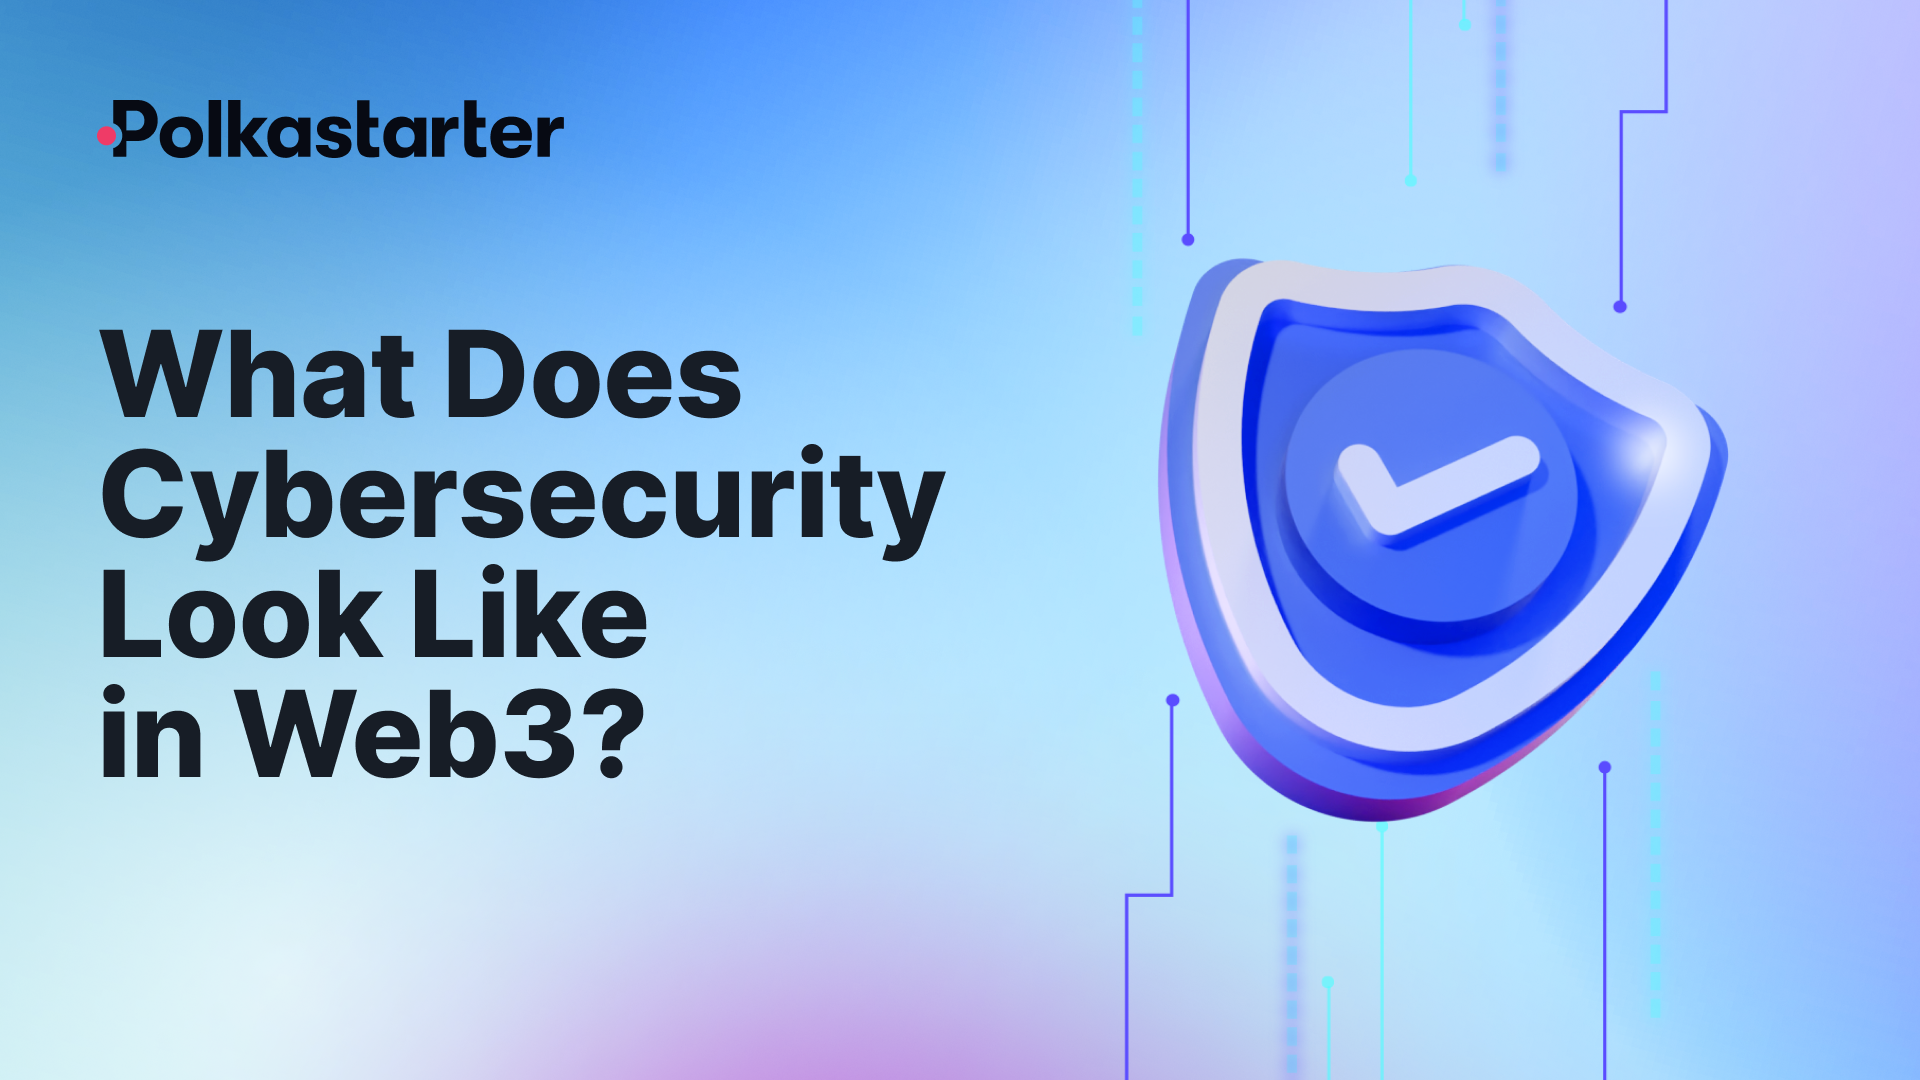 What Does Cybersecurity Look Like in Web3?